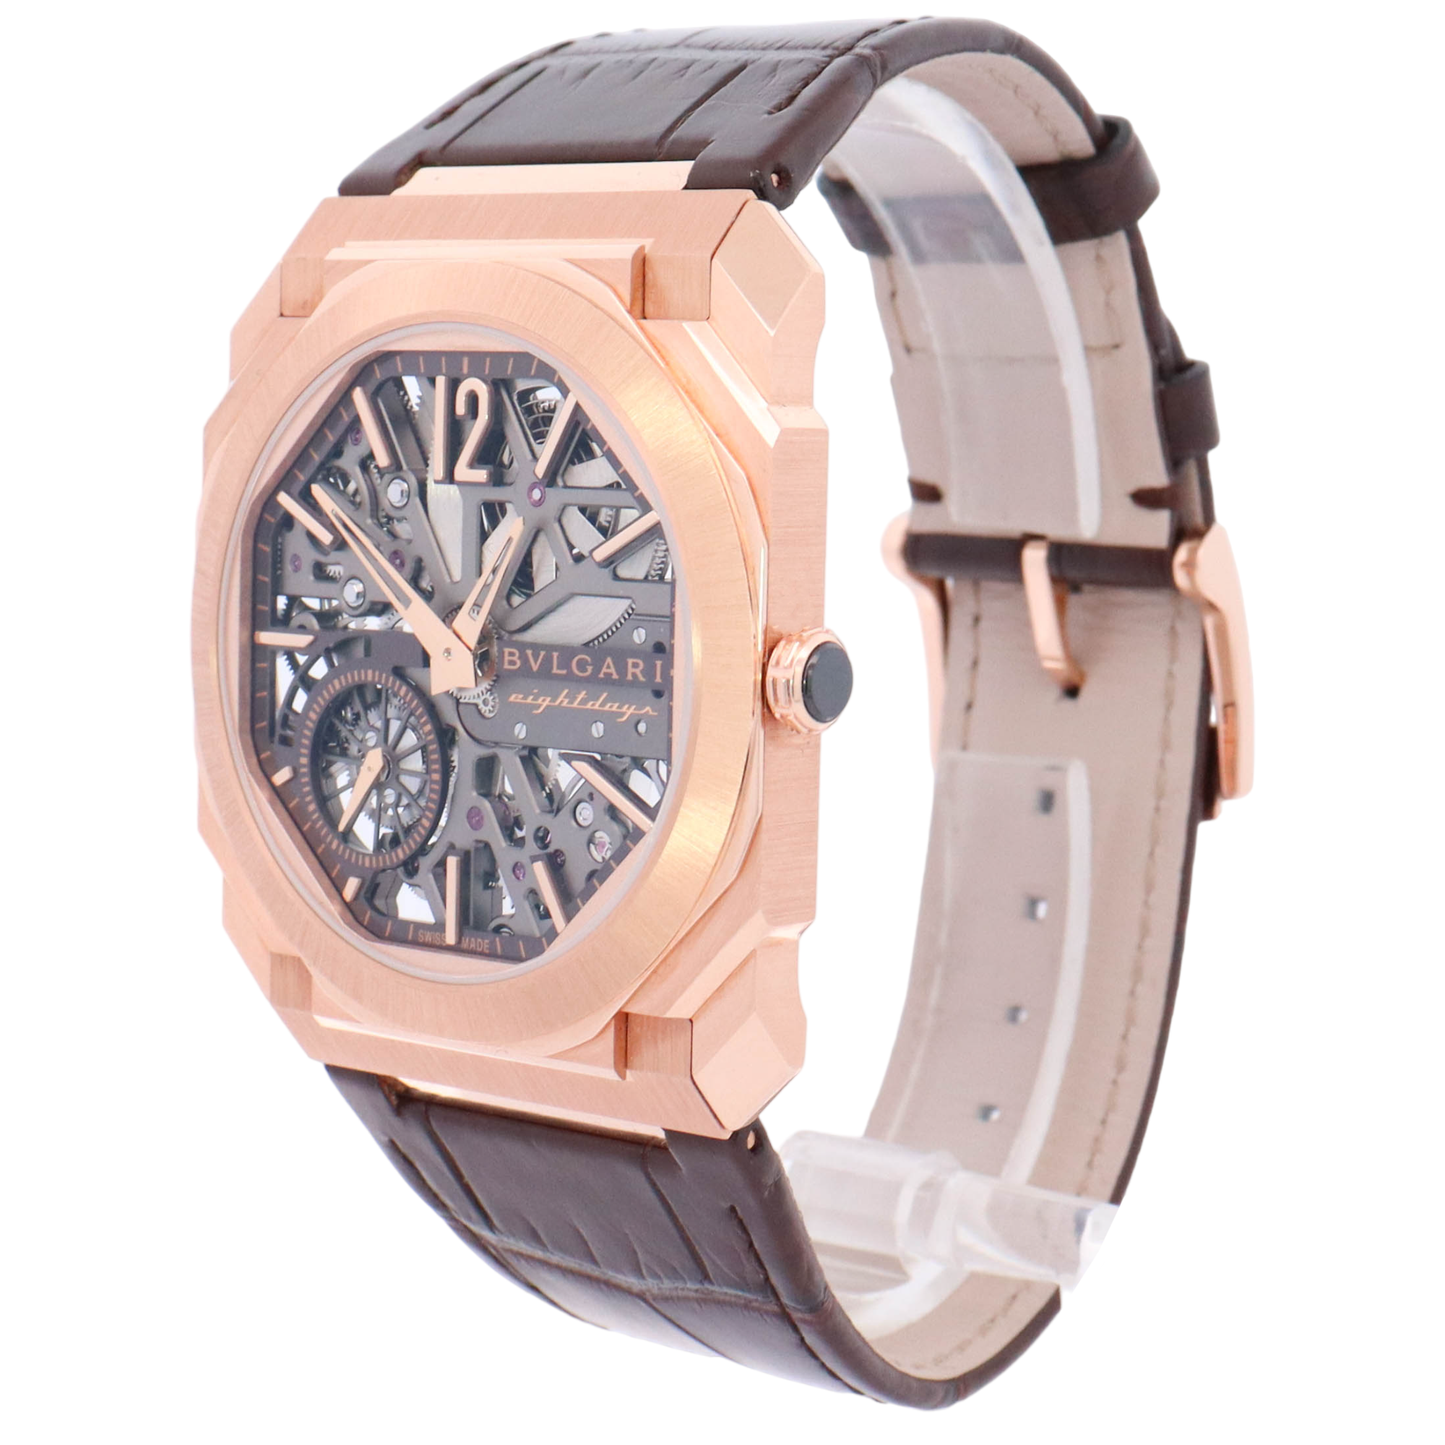 Blvgari Octo Finissimo 40mm 18kt Rose Gold Skeleton Dial Watch Reference# 103667 - Happy Jewelers Fine Jewelry Lifetime Warranty